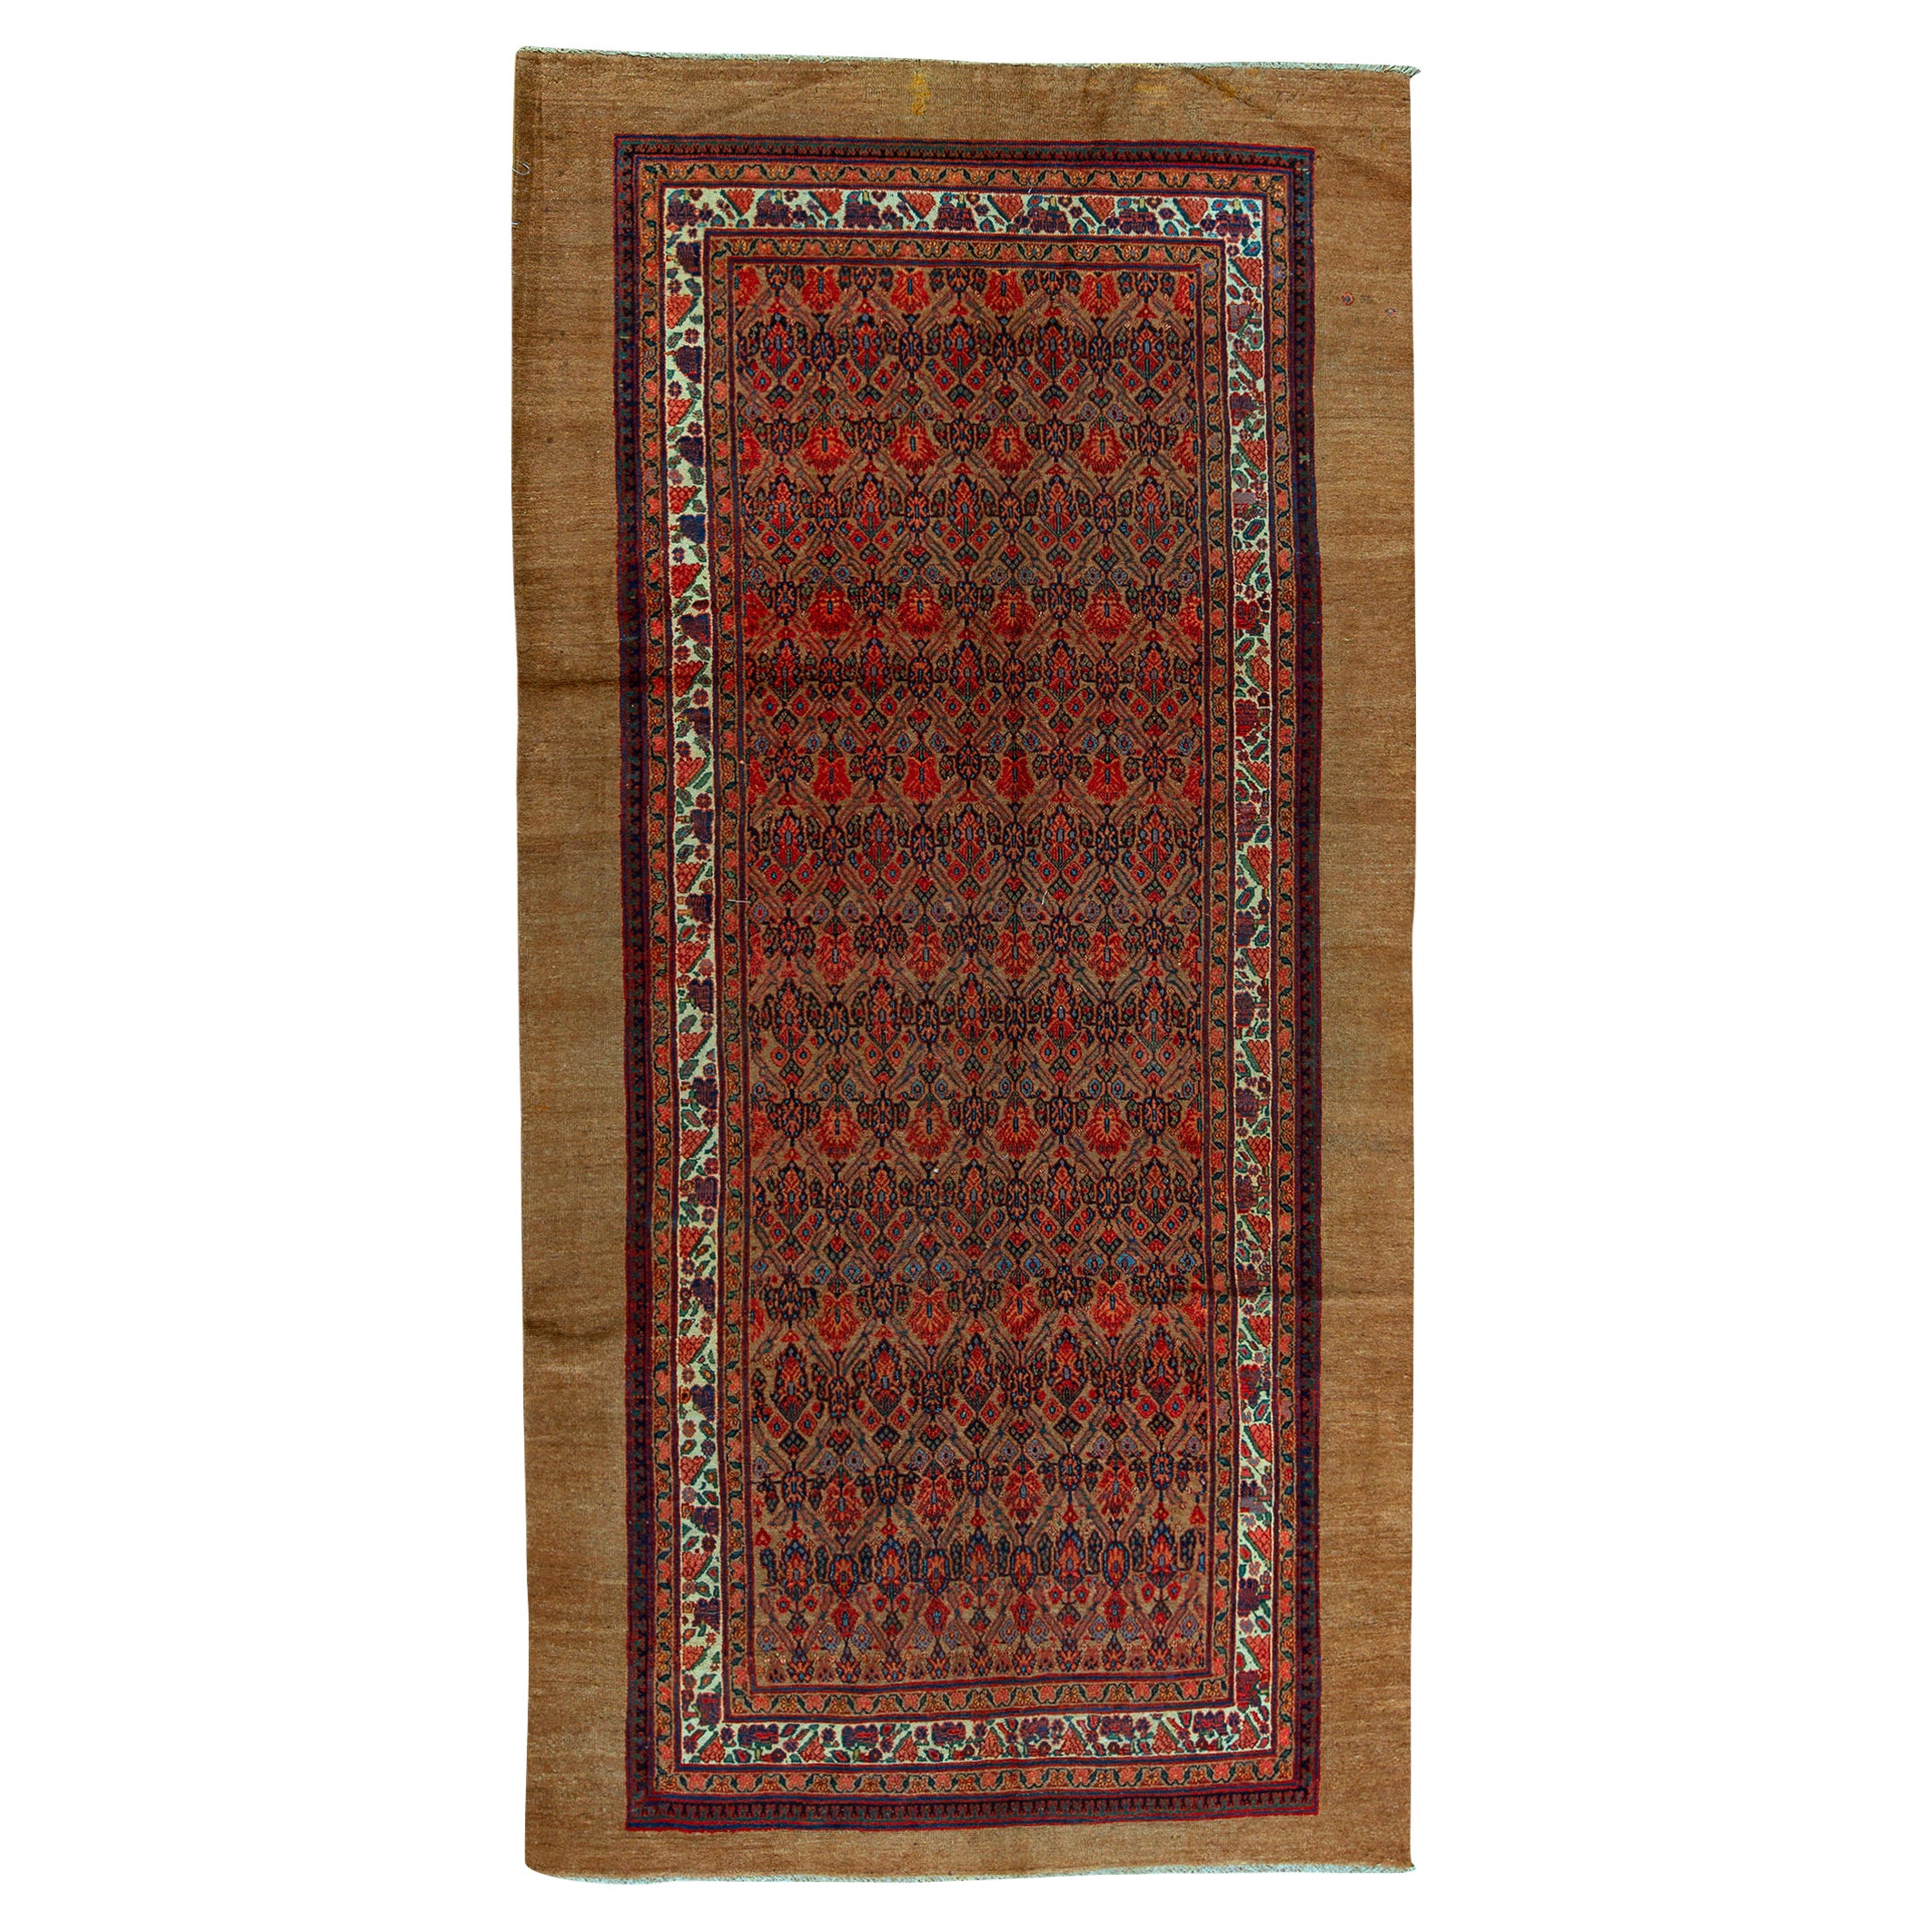   Antique Persian Fine Traditional Handwoven Luxury Wool Multi Rug For Sale